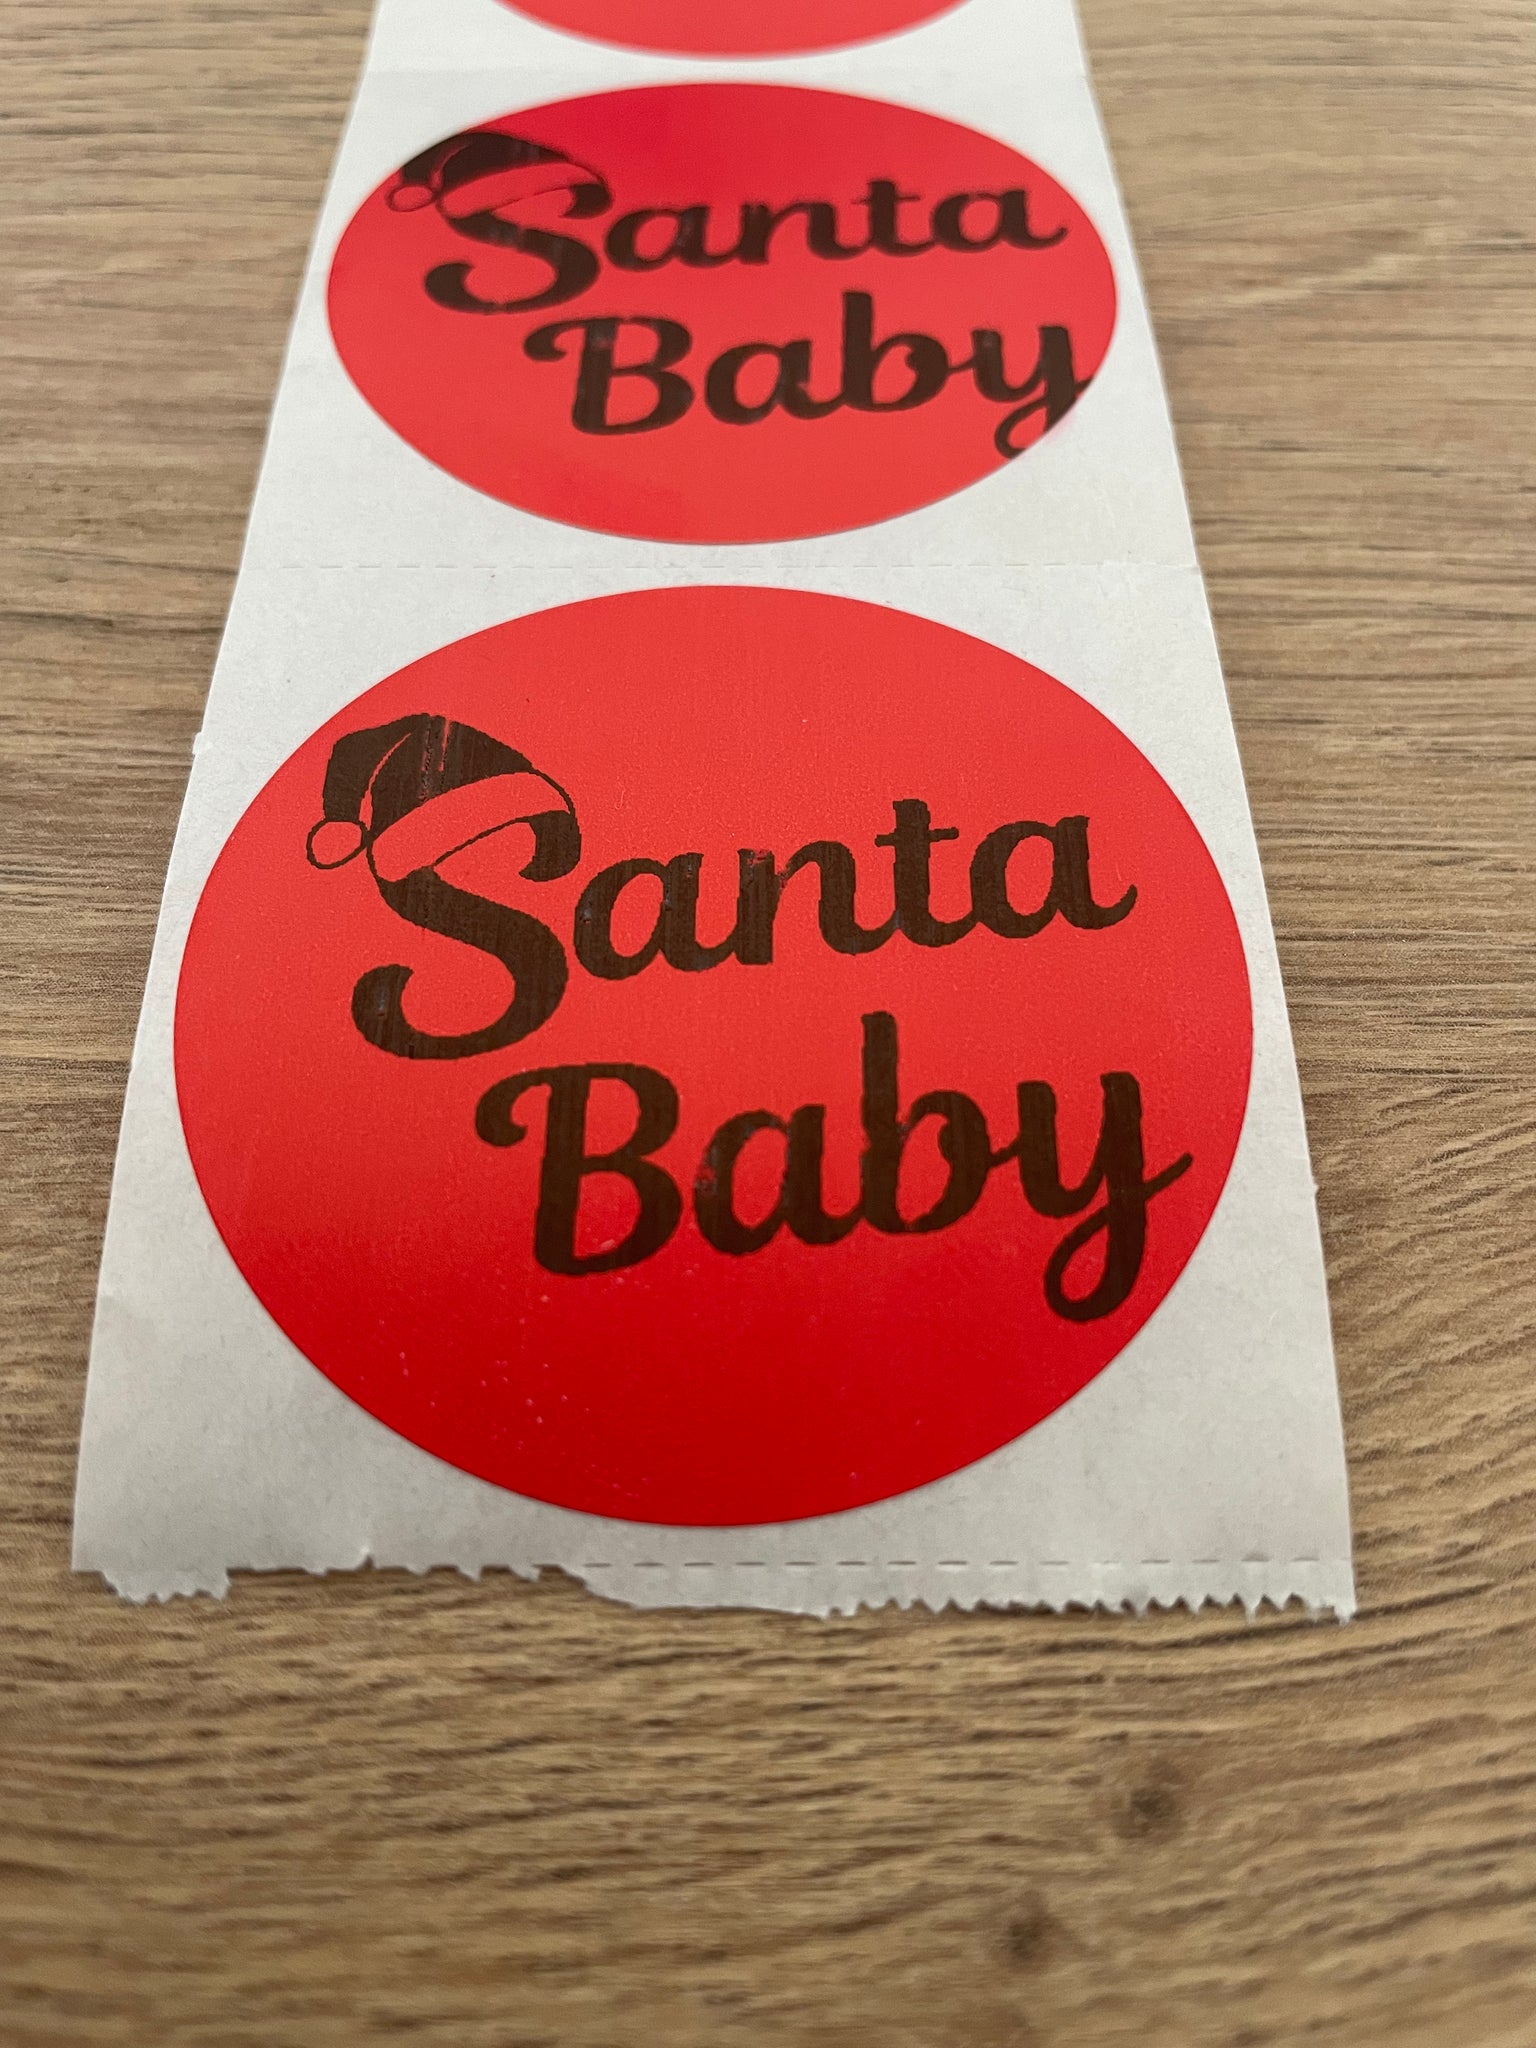 Santa Baby Stickers  | 2" Round Shipping Stickers